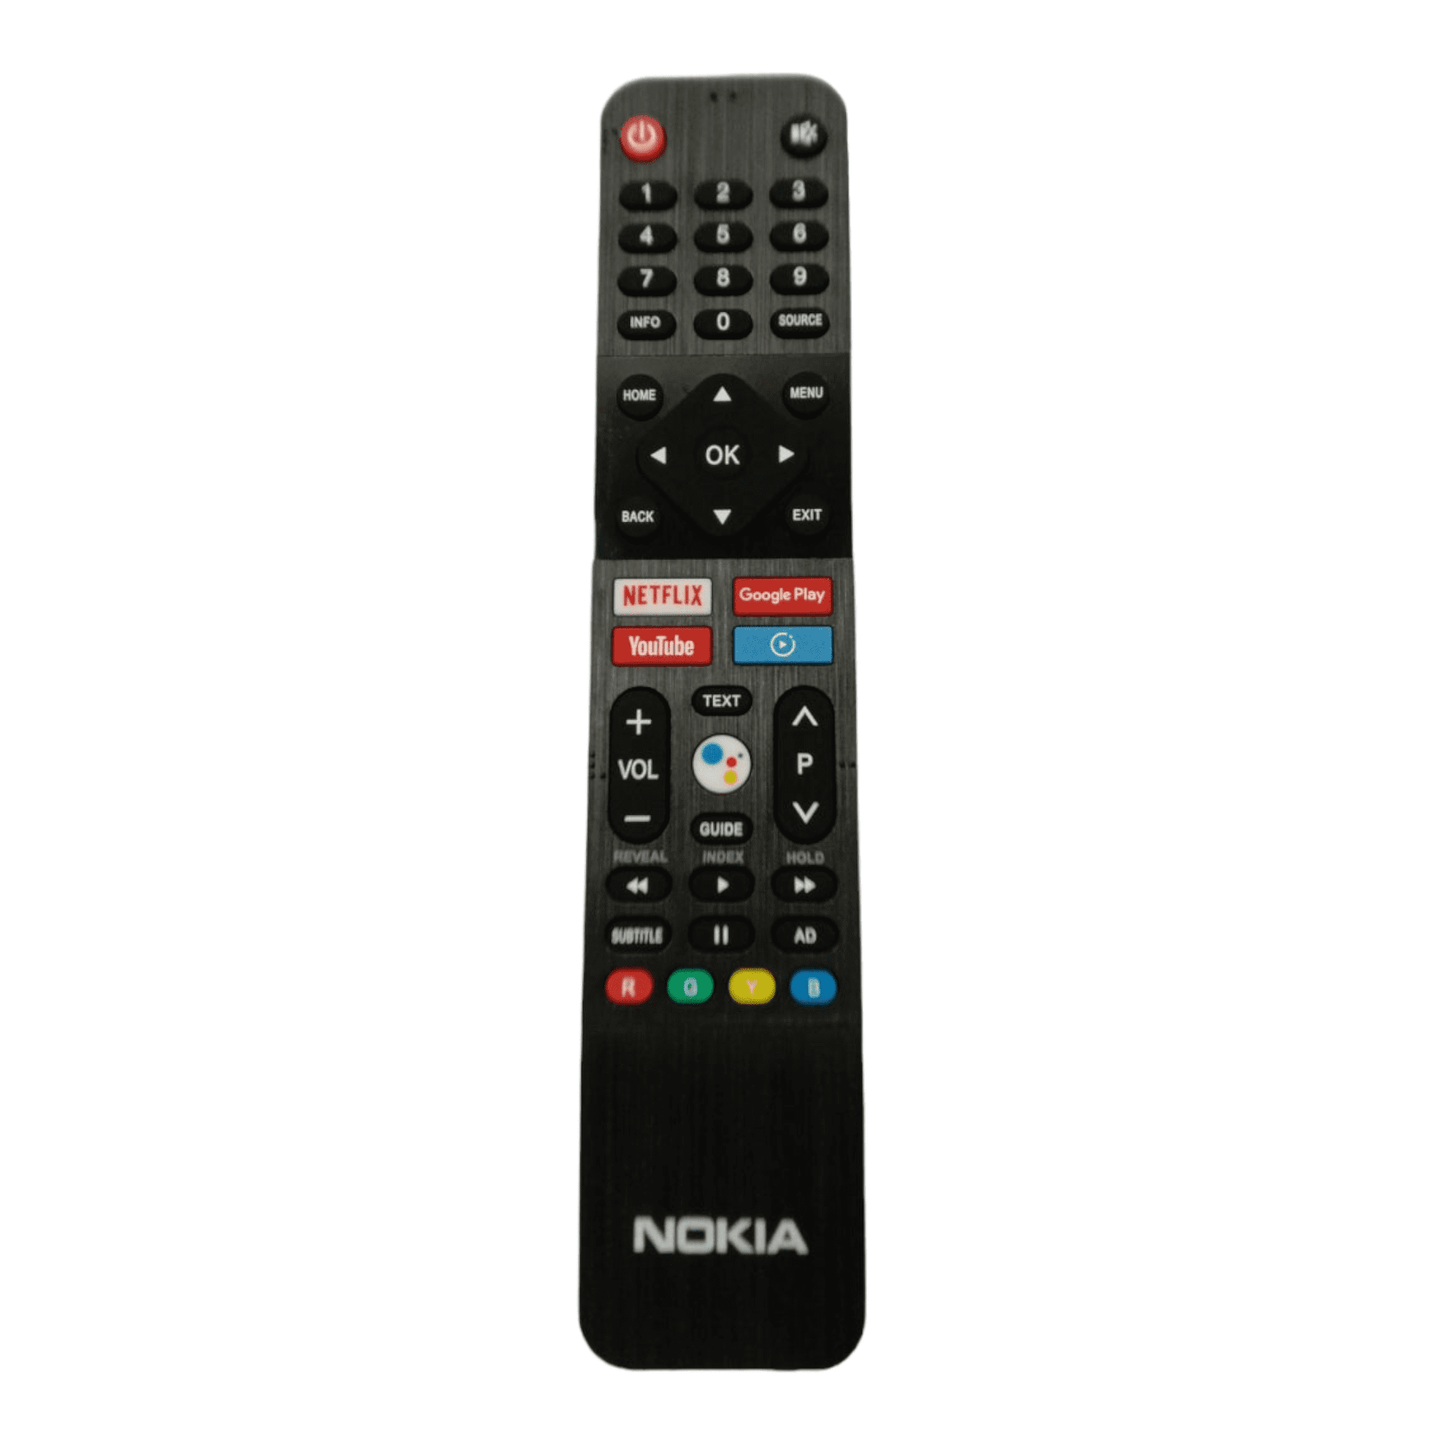 Nokia  Smart led tv remote with Google voice recognition and YouTube and Netflix and Amazon prime video - Faritha